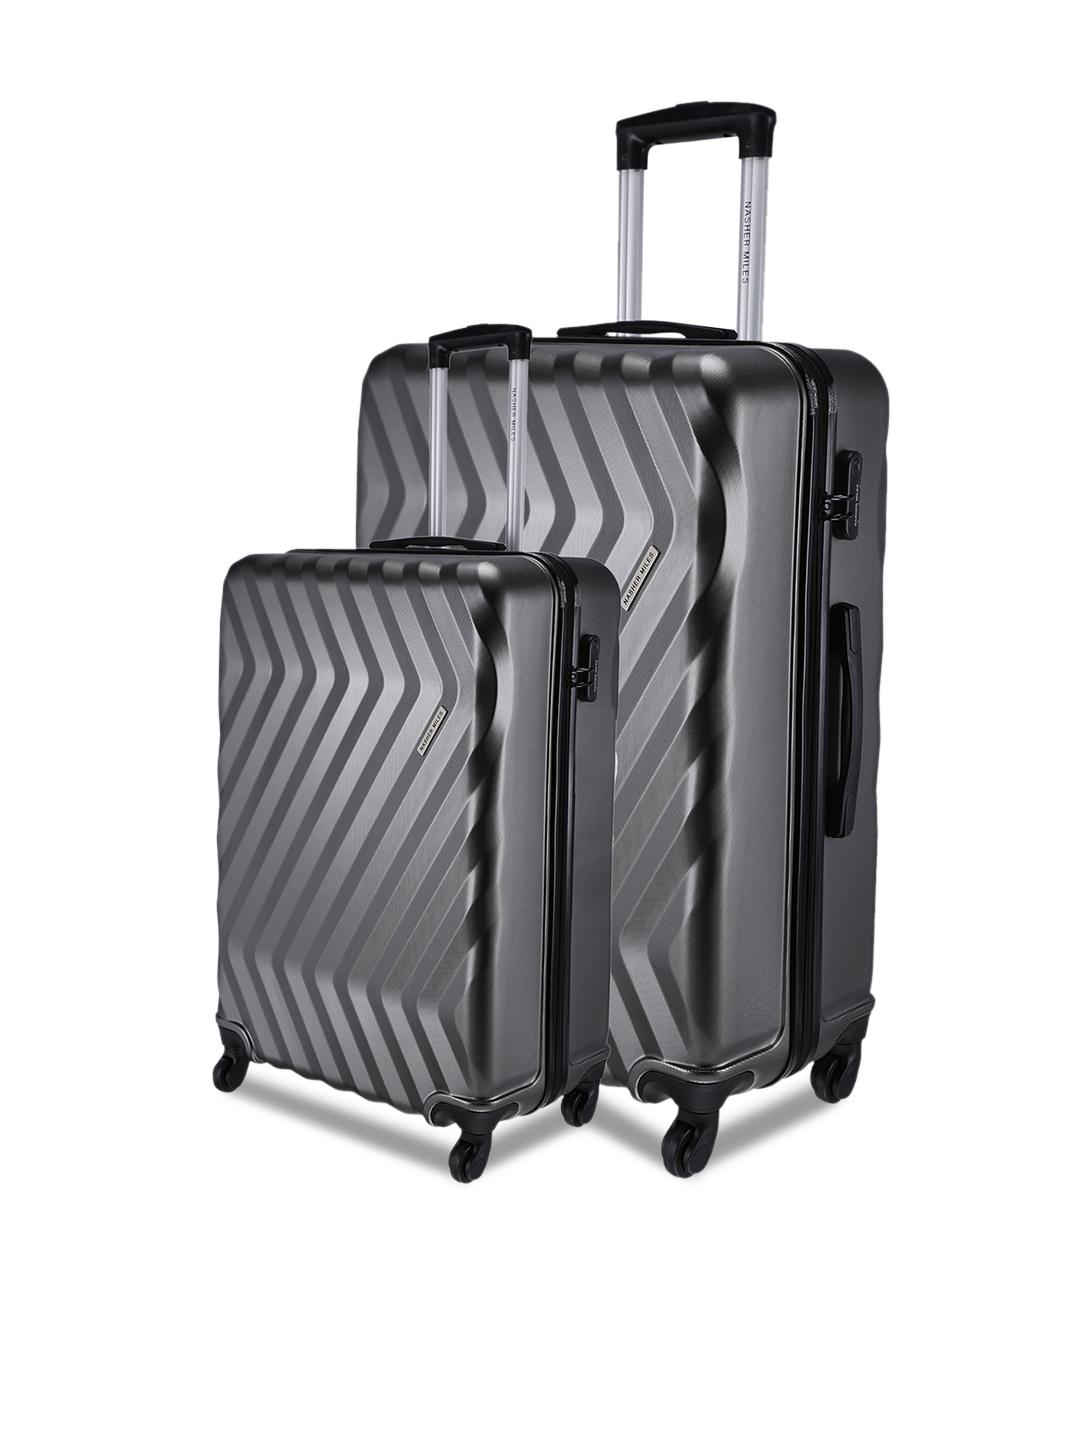 nasher miles unisex set of 2 lombard number lock trolley suitcases